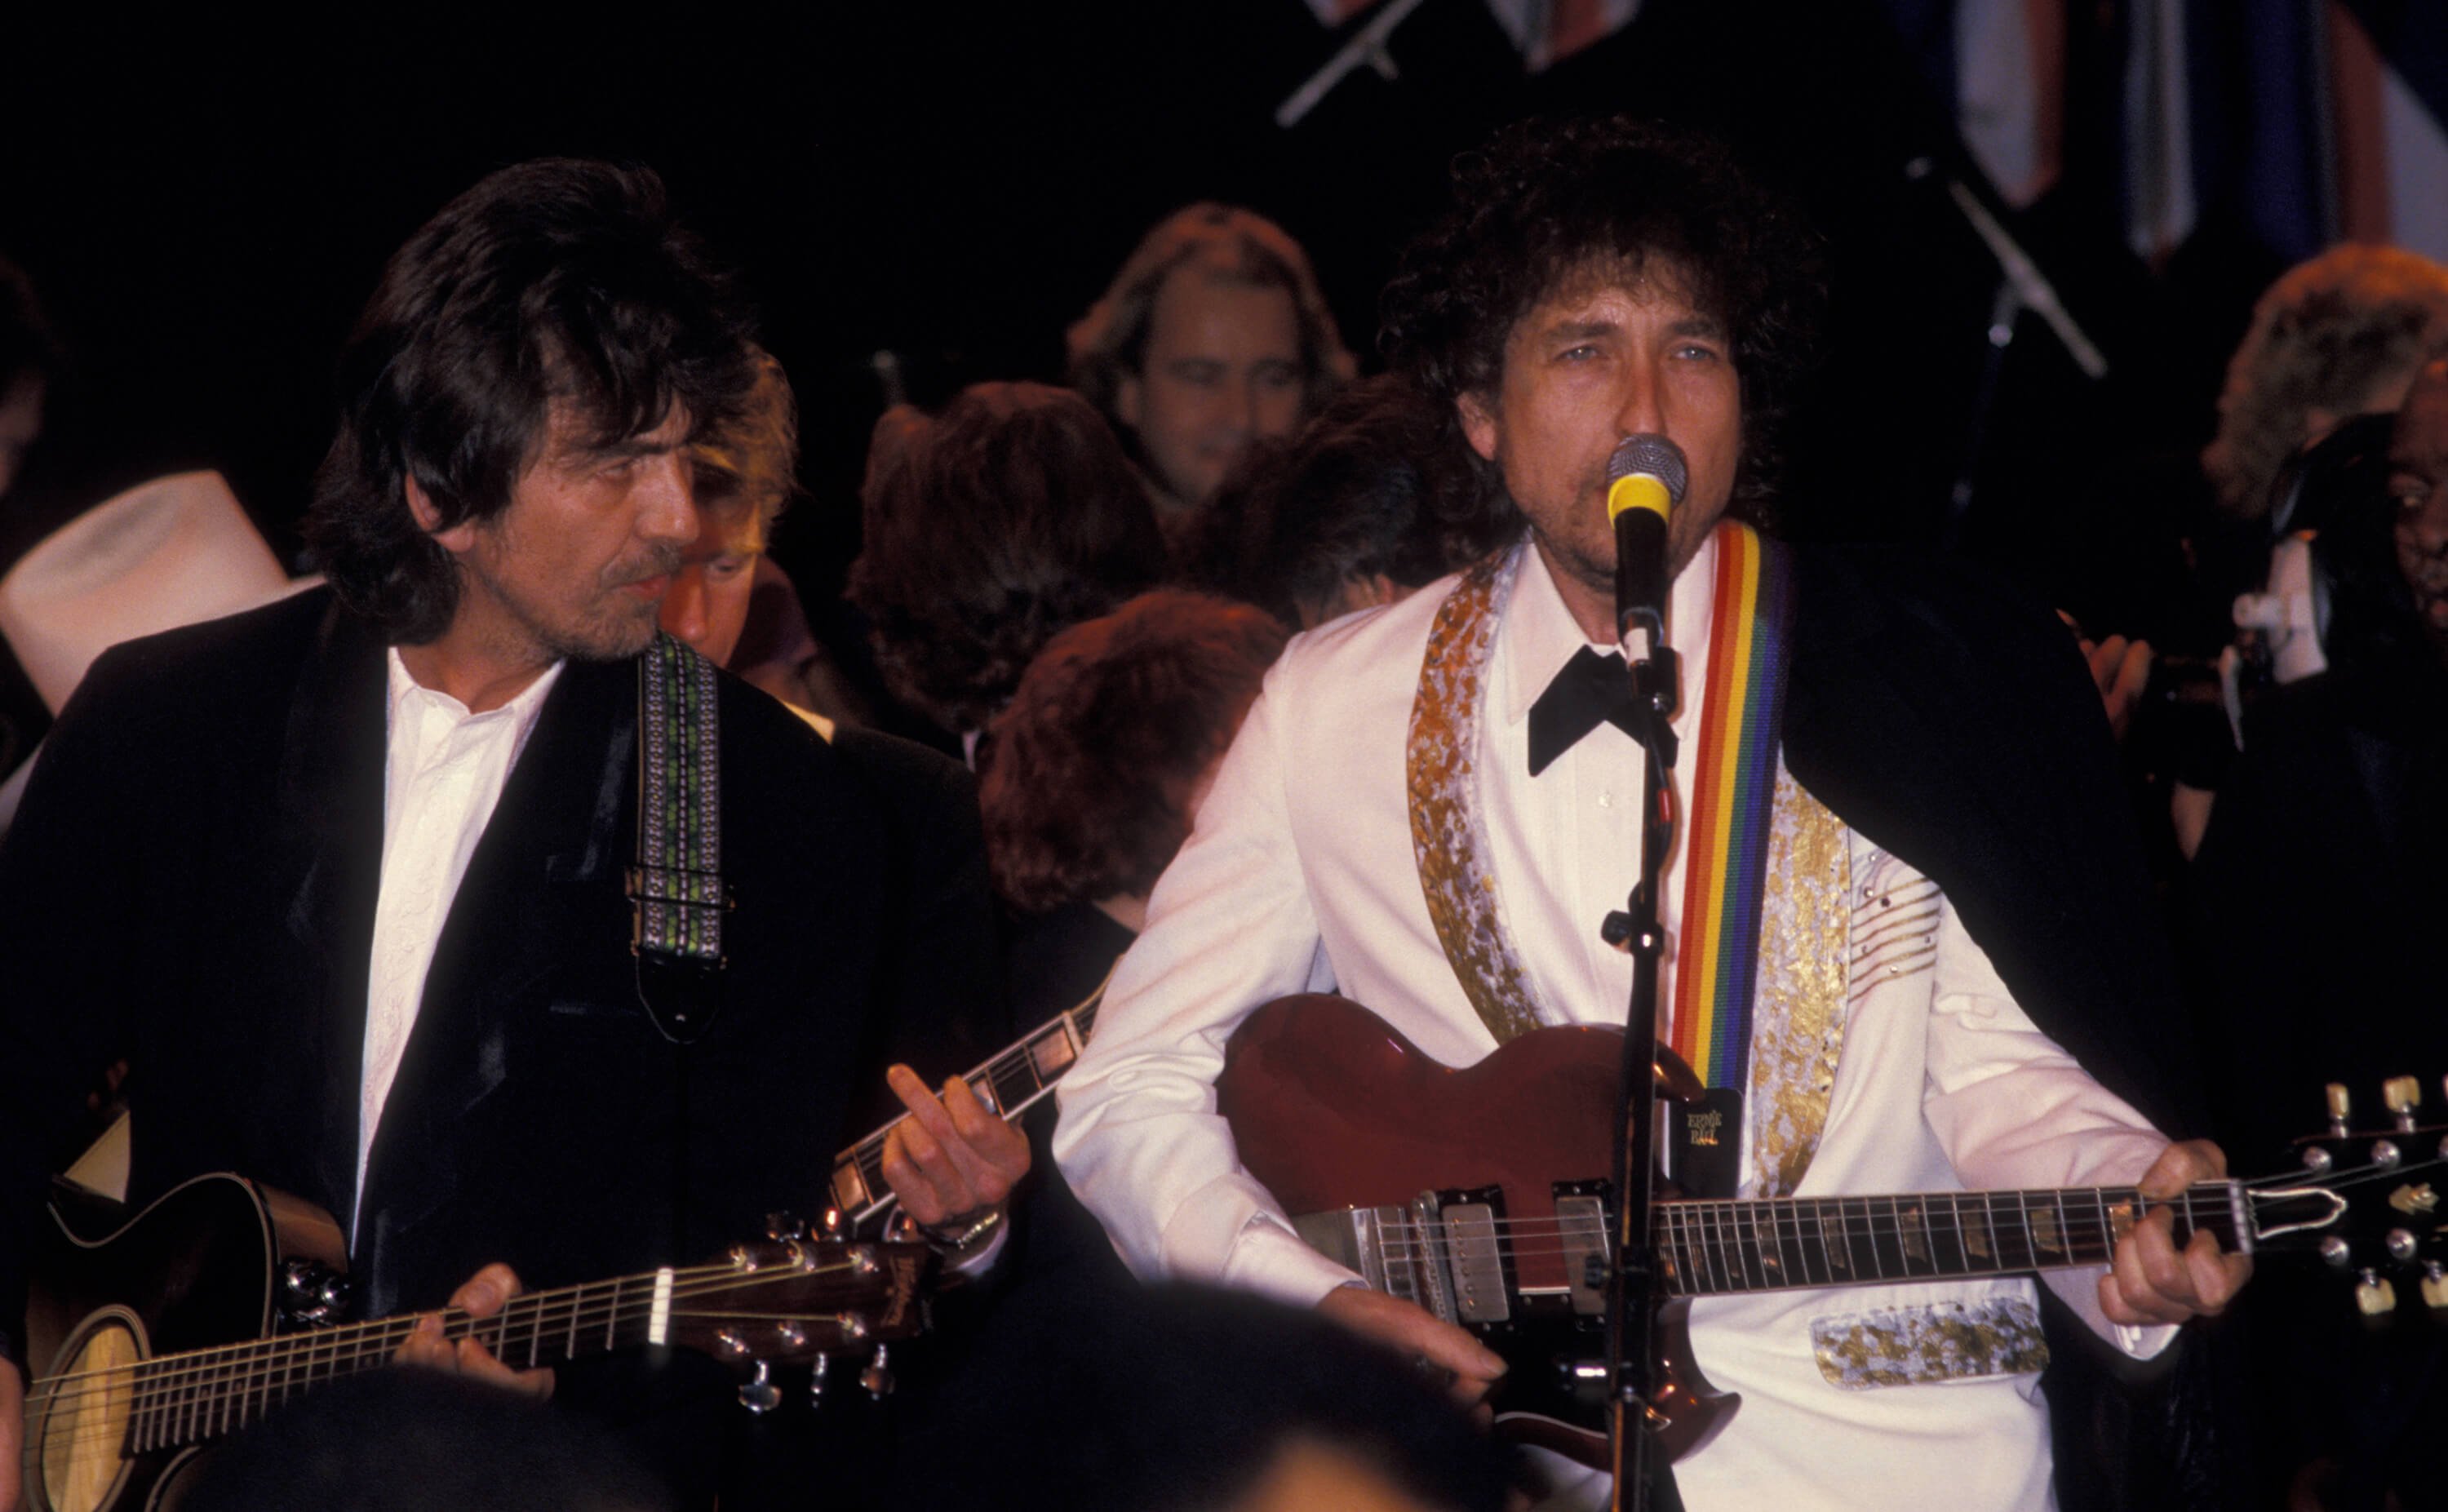 George Harrison of The Beatles and Bob Dylan, inductees